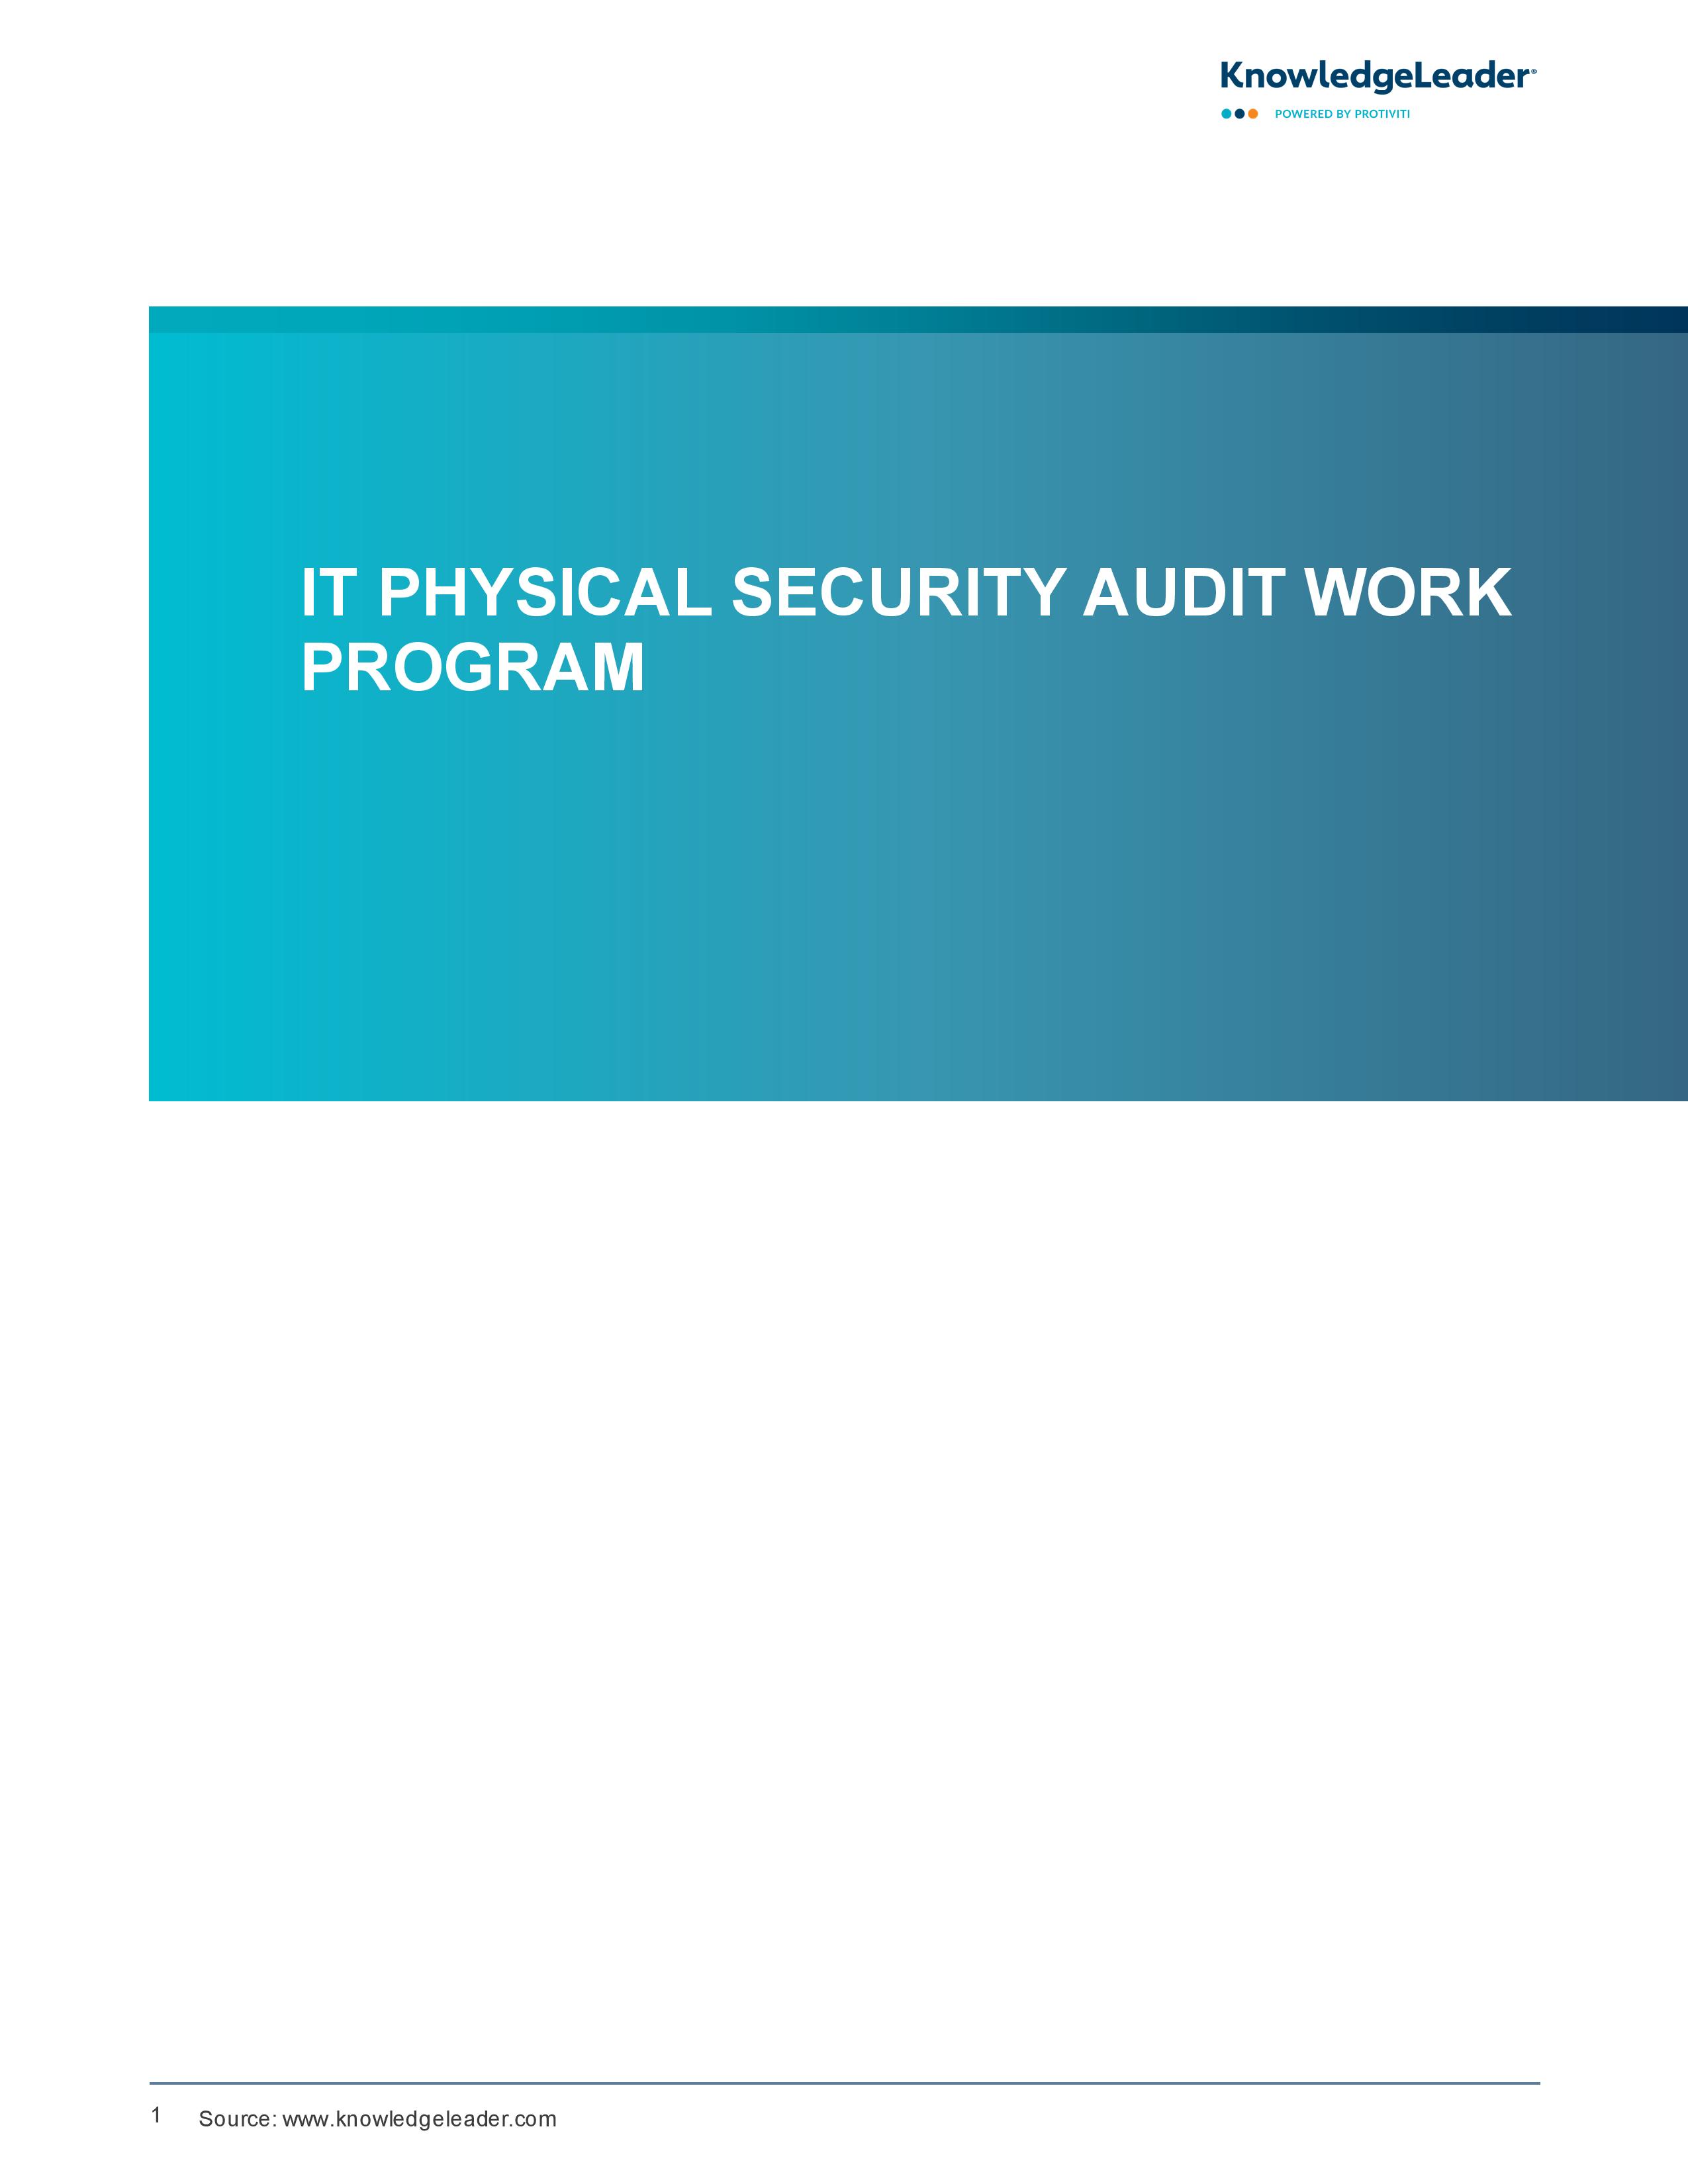 screenshot of the first page of IT Physical Security Audit Work Program